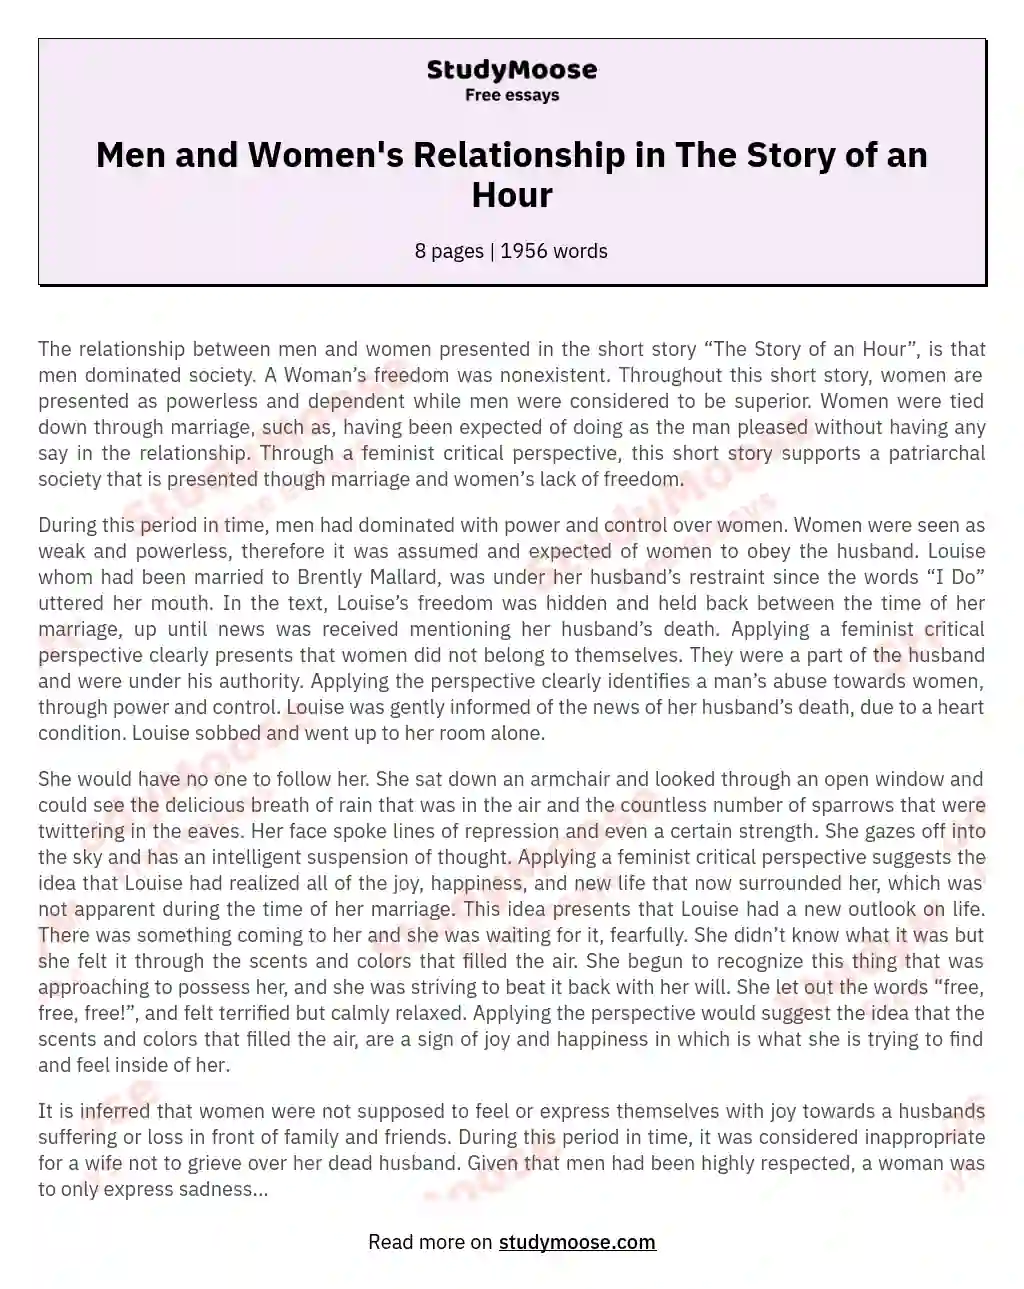 Men and Women's Relationship in The Story of an Hour essay